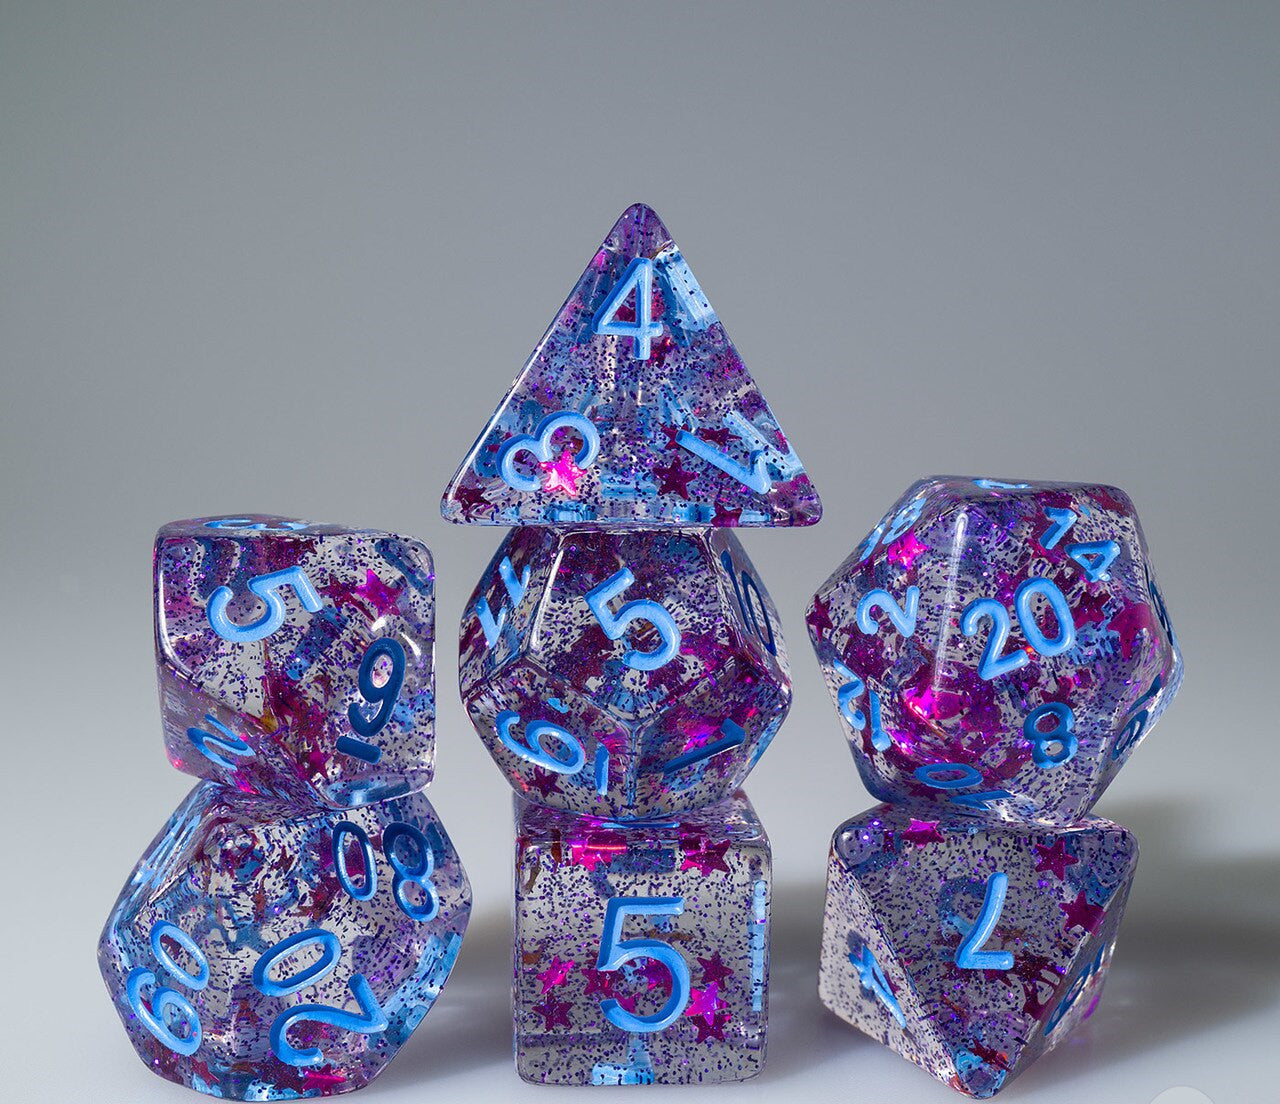 Magenta Glitter and Purple Stars with Blue Ink 7pc Polyhedral Dice Set